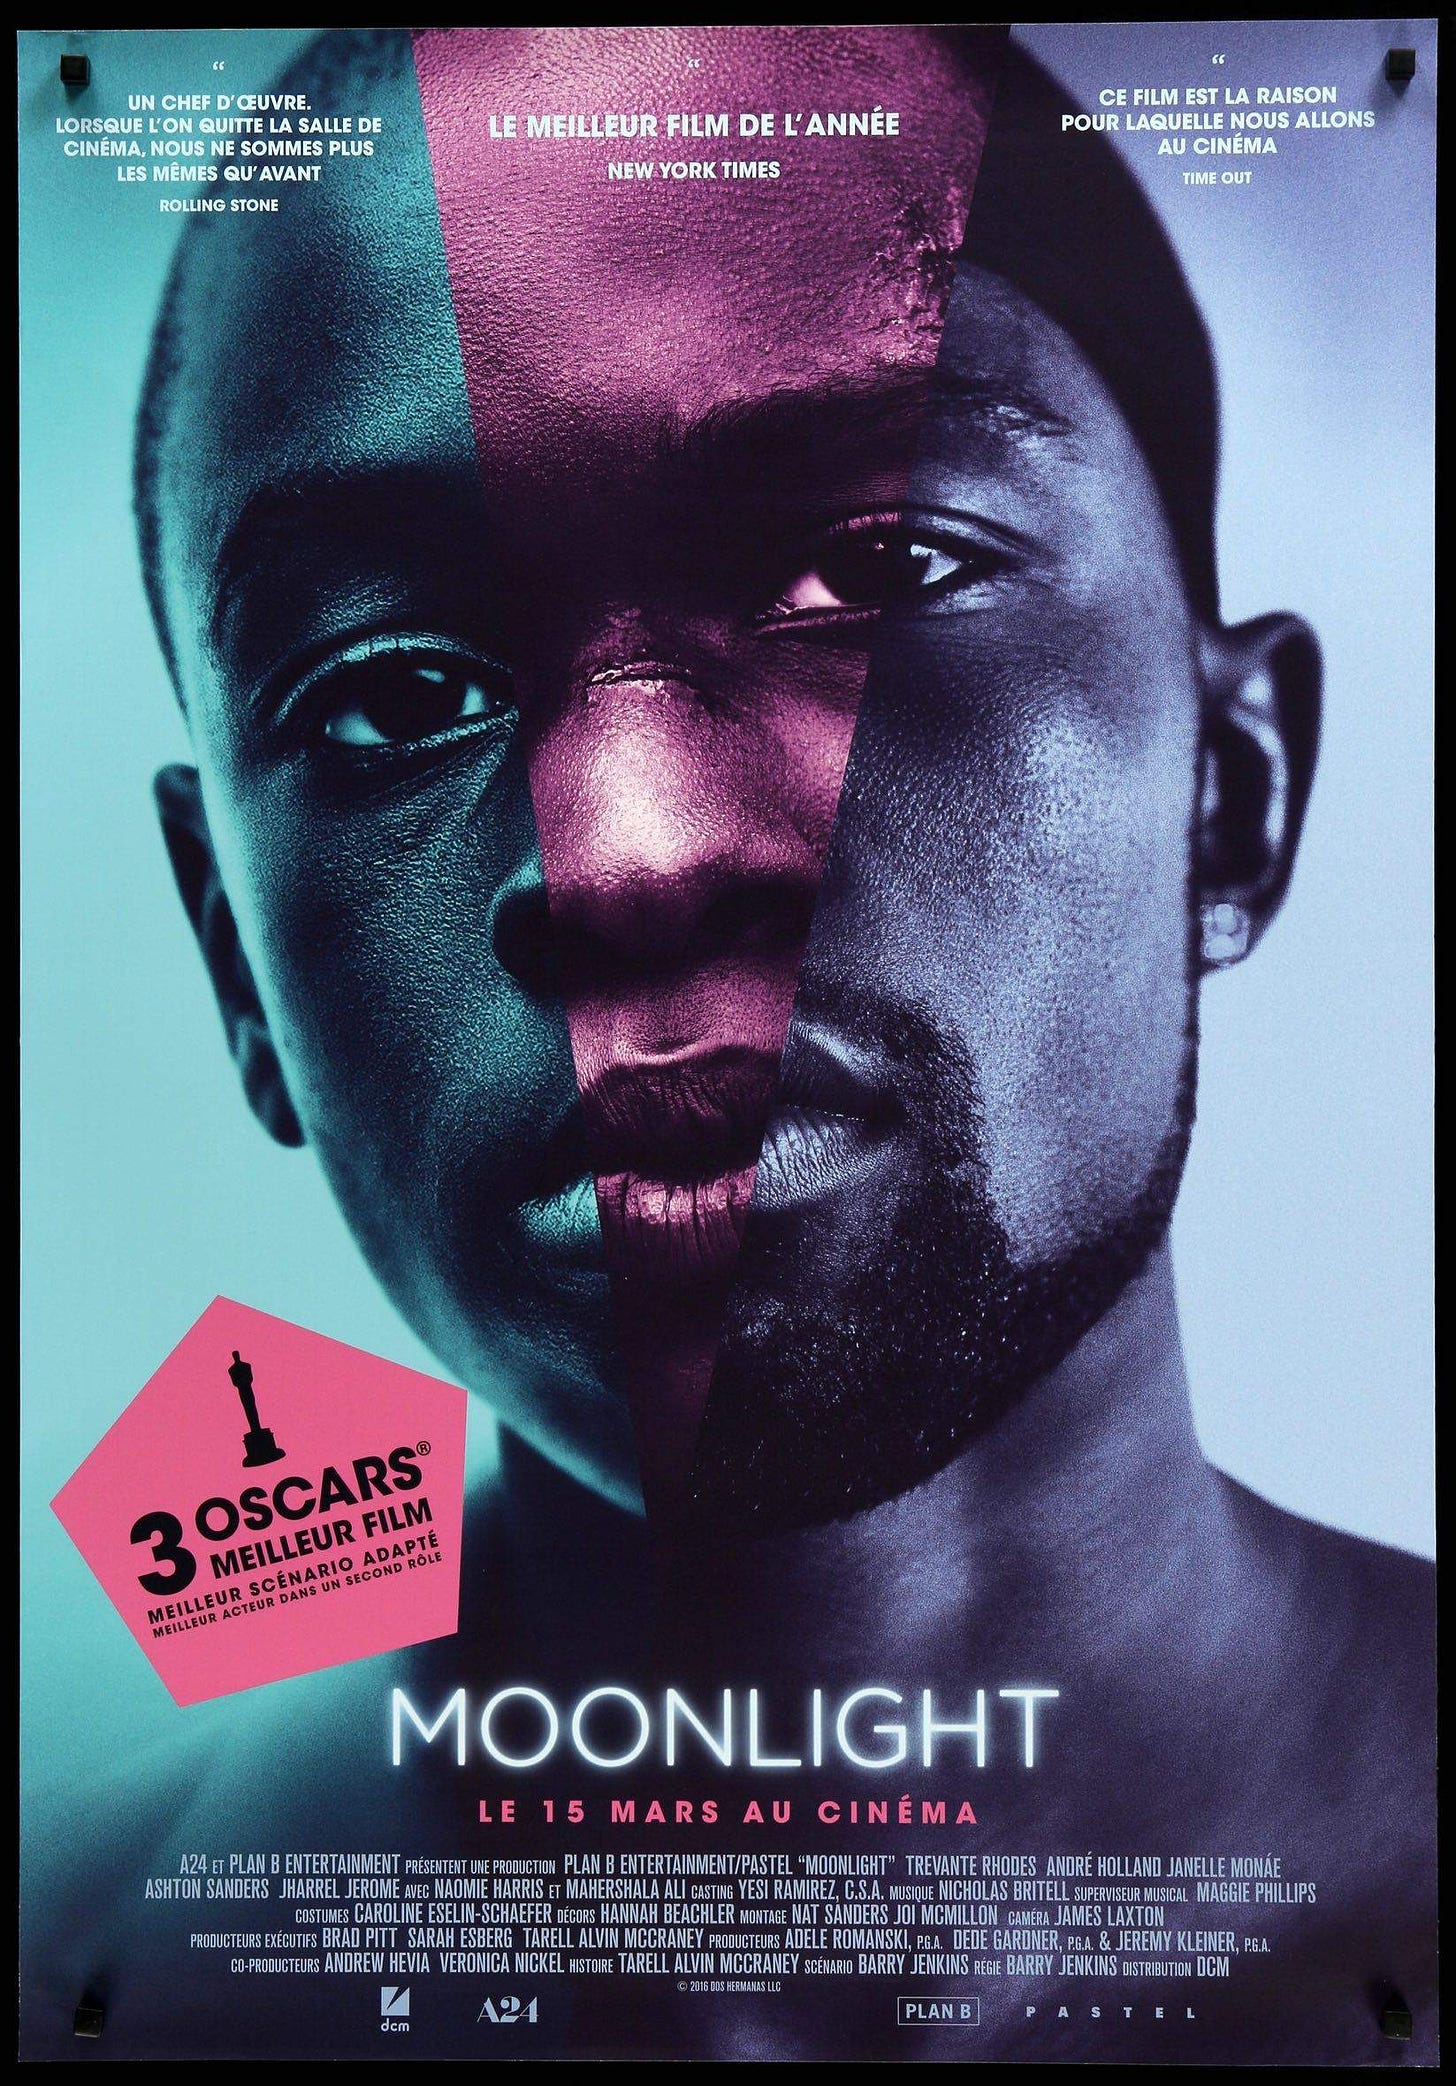 Movie poster for the film Moonlight, depicting the protragonist, a Black man, at three ages, a child, an adolescent, and an adult. 